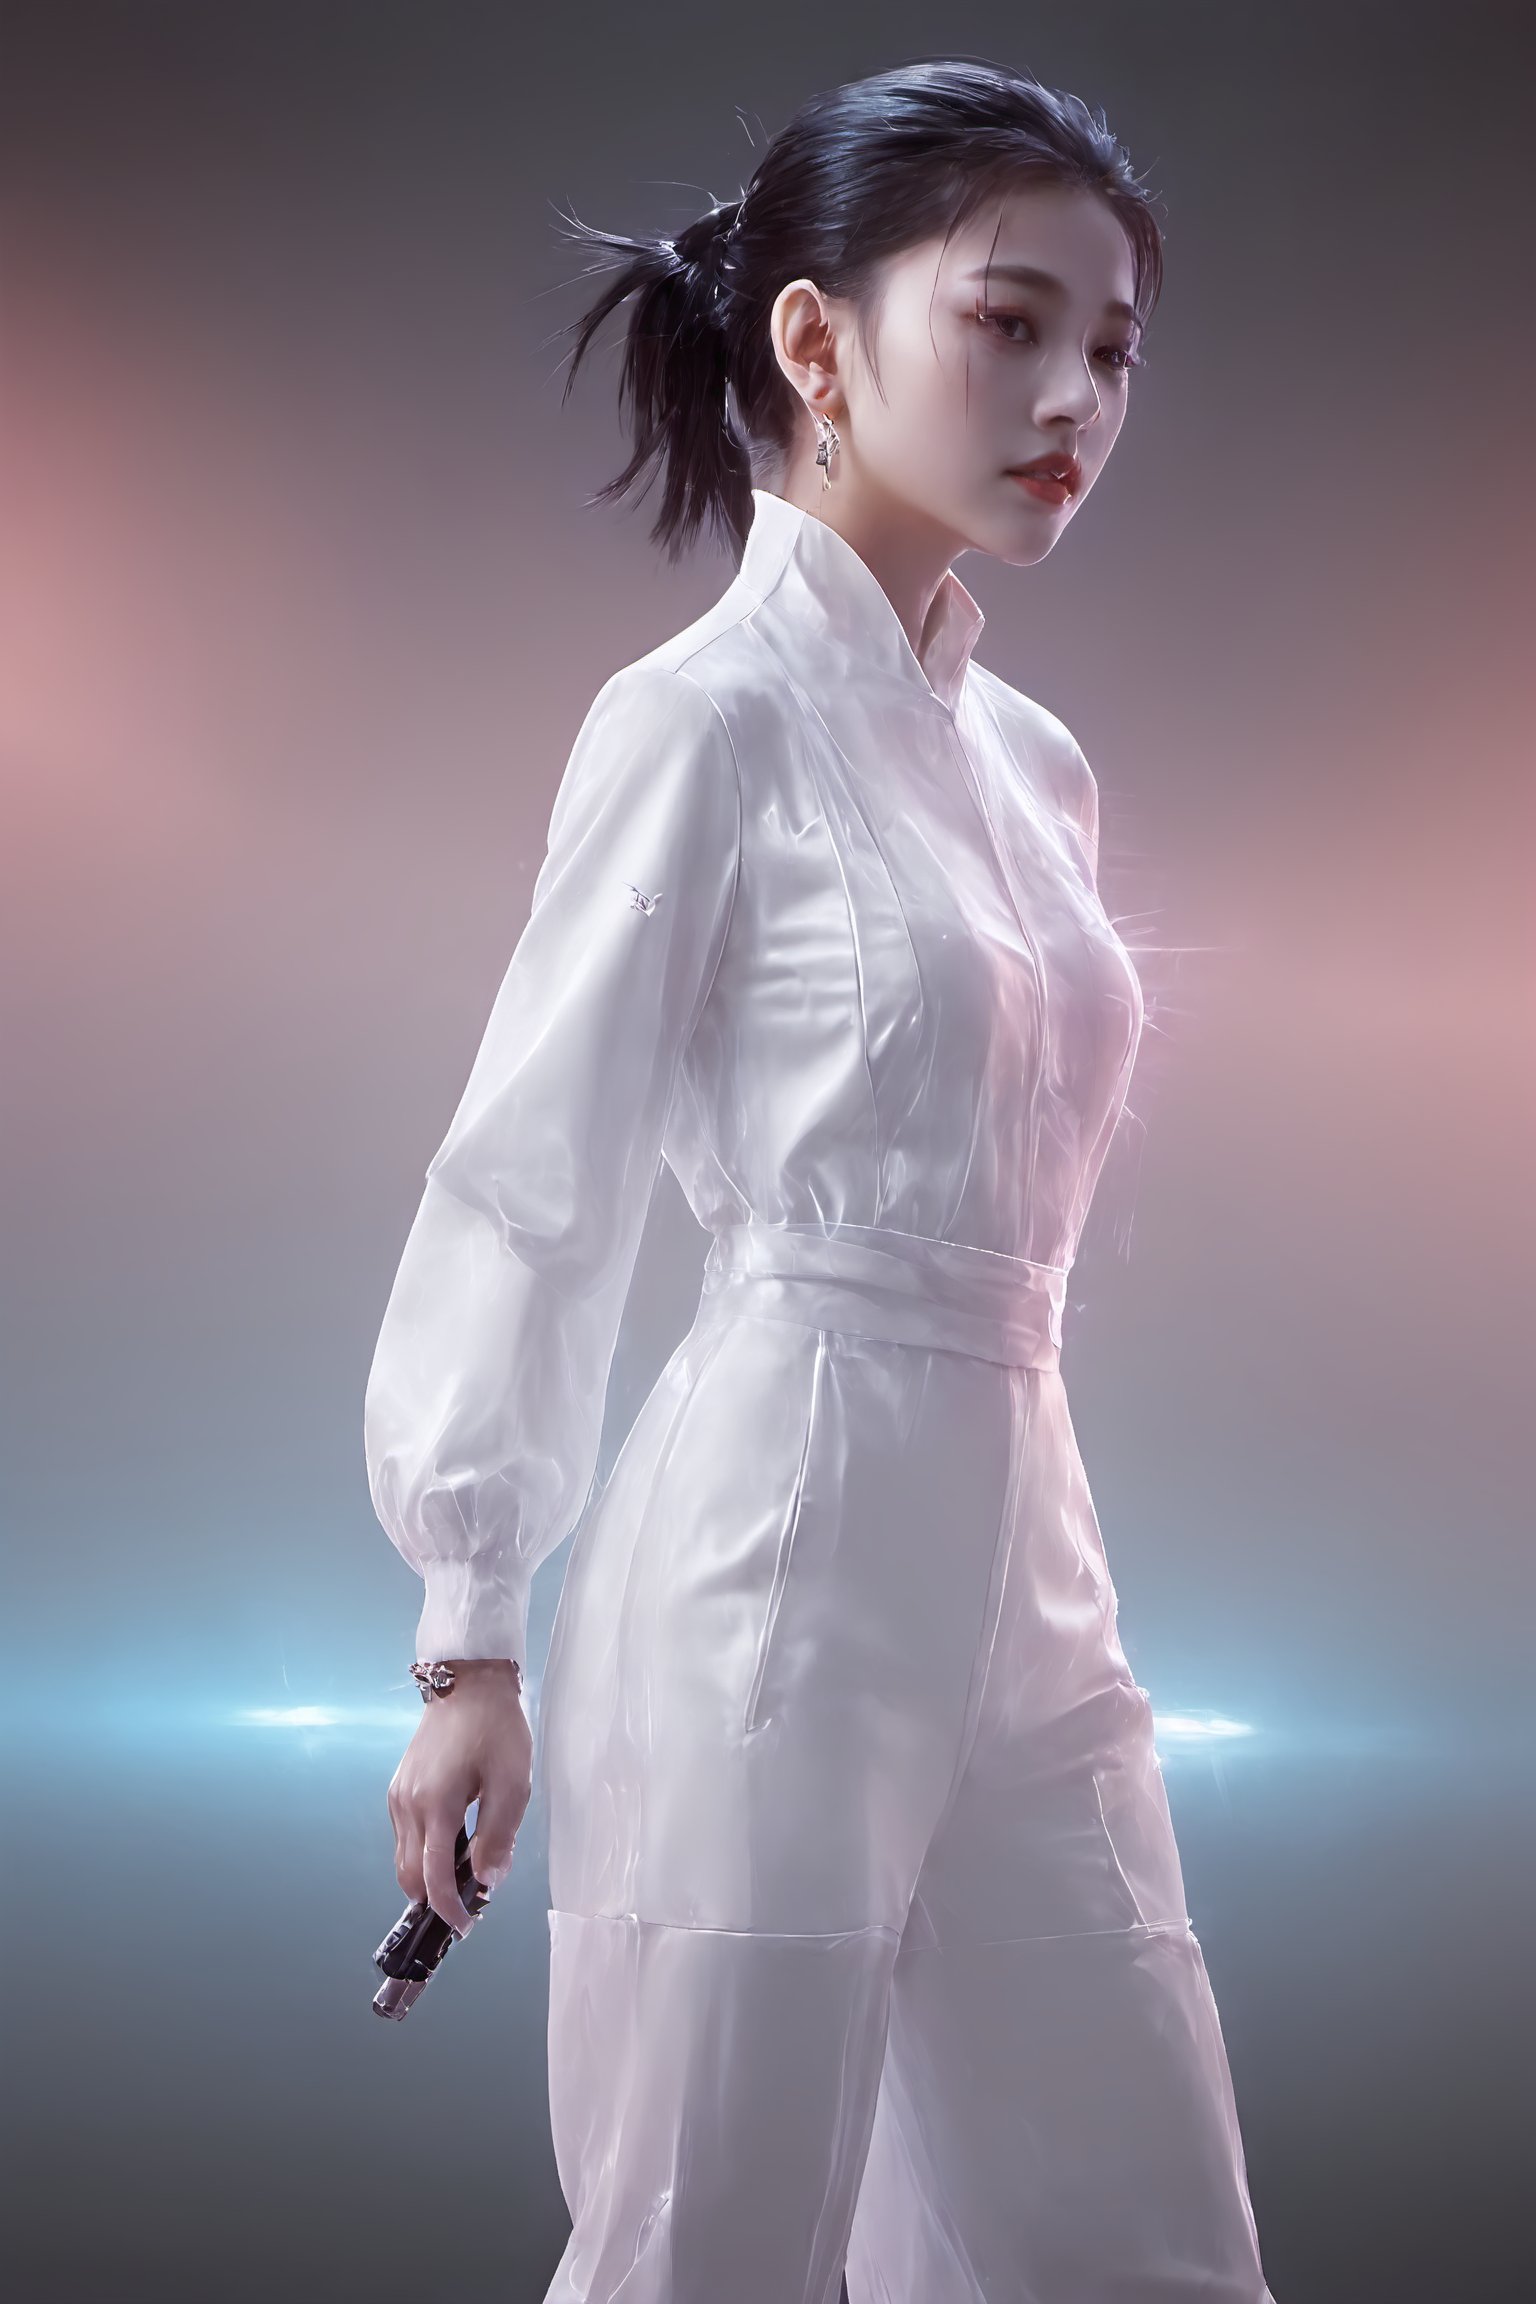 style of Yanjun Cheng, iridescent, In the neon-lit cyberpunk cityscape, a stunningly beautiful girl stands amidst the technological marvels, clad in elegant white attire that glows faintly with neon accents. As the city's advanced machinery hums around her, she exudes an air of confidence and mystery, embodying the seamless blend of human allure and cutting-edge technology in the futuristic world, watercolor, oil, ink, beizu style,xxmixgirl